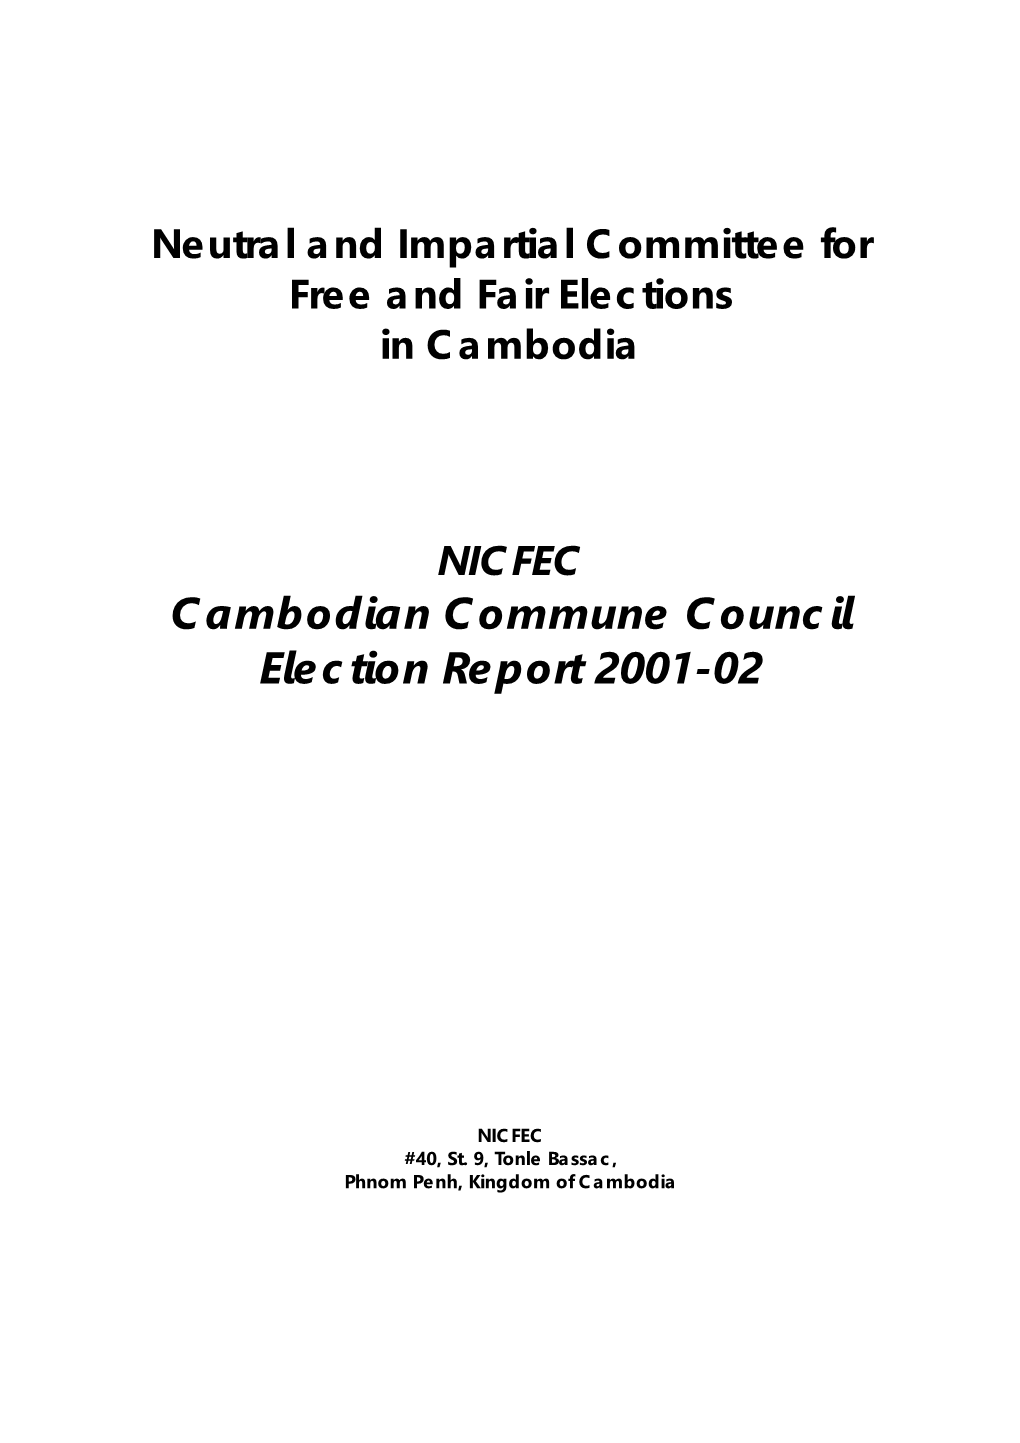 Cambodian Commune Council Election Report 2001-02